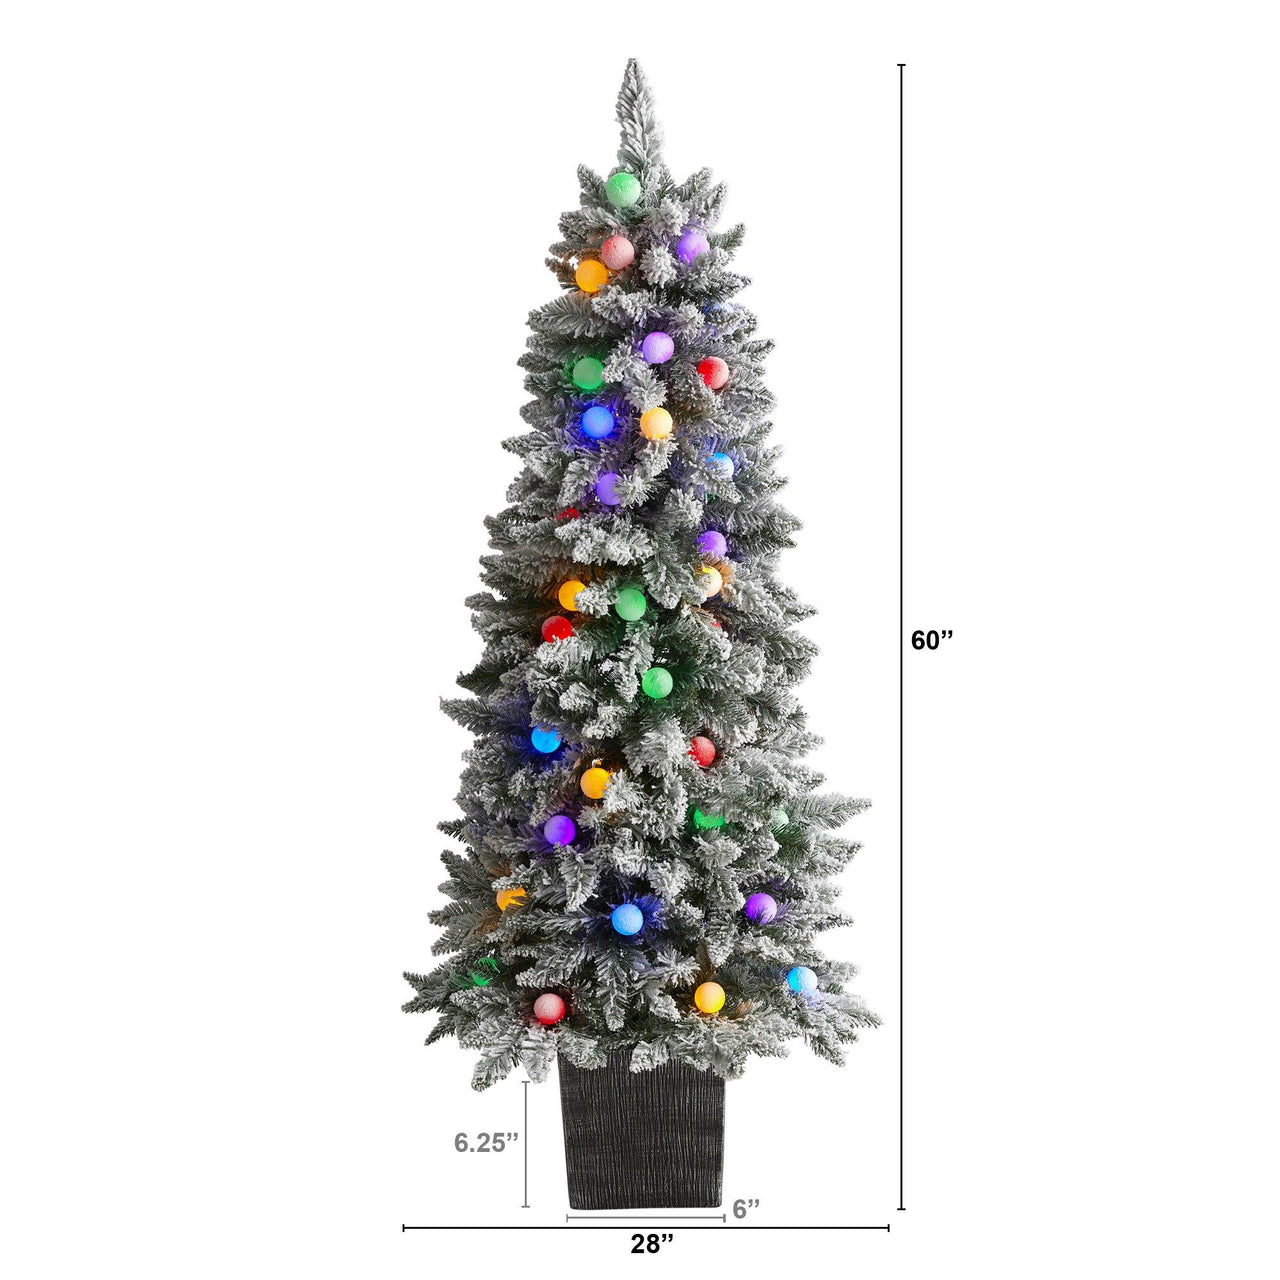 5' Flocked British Columbia Mountain Fir Artificial Christmas Tree in Decorative Planter with 50 Multi Color Globe Bulbs and 379 Bendable Branches - The Fox Decor